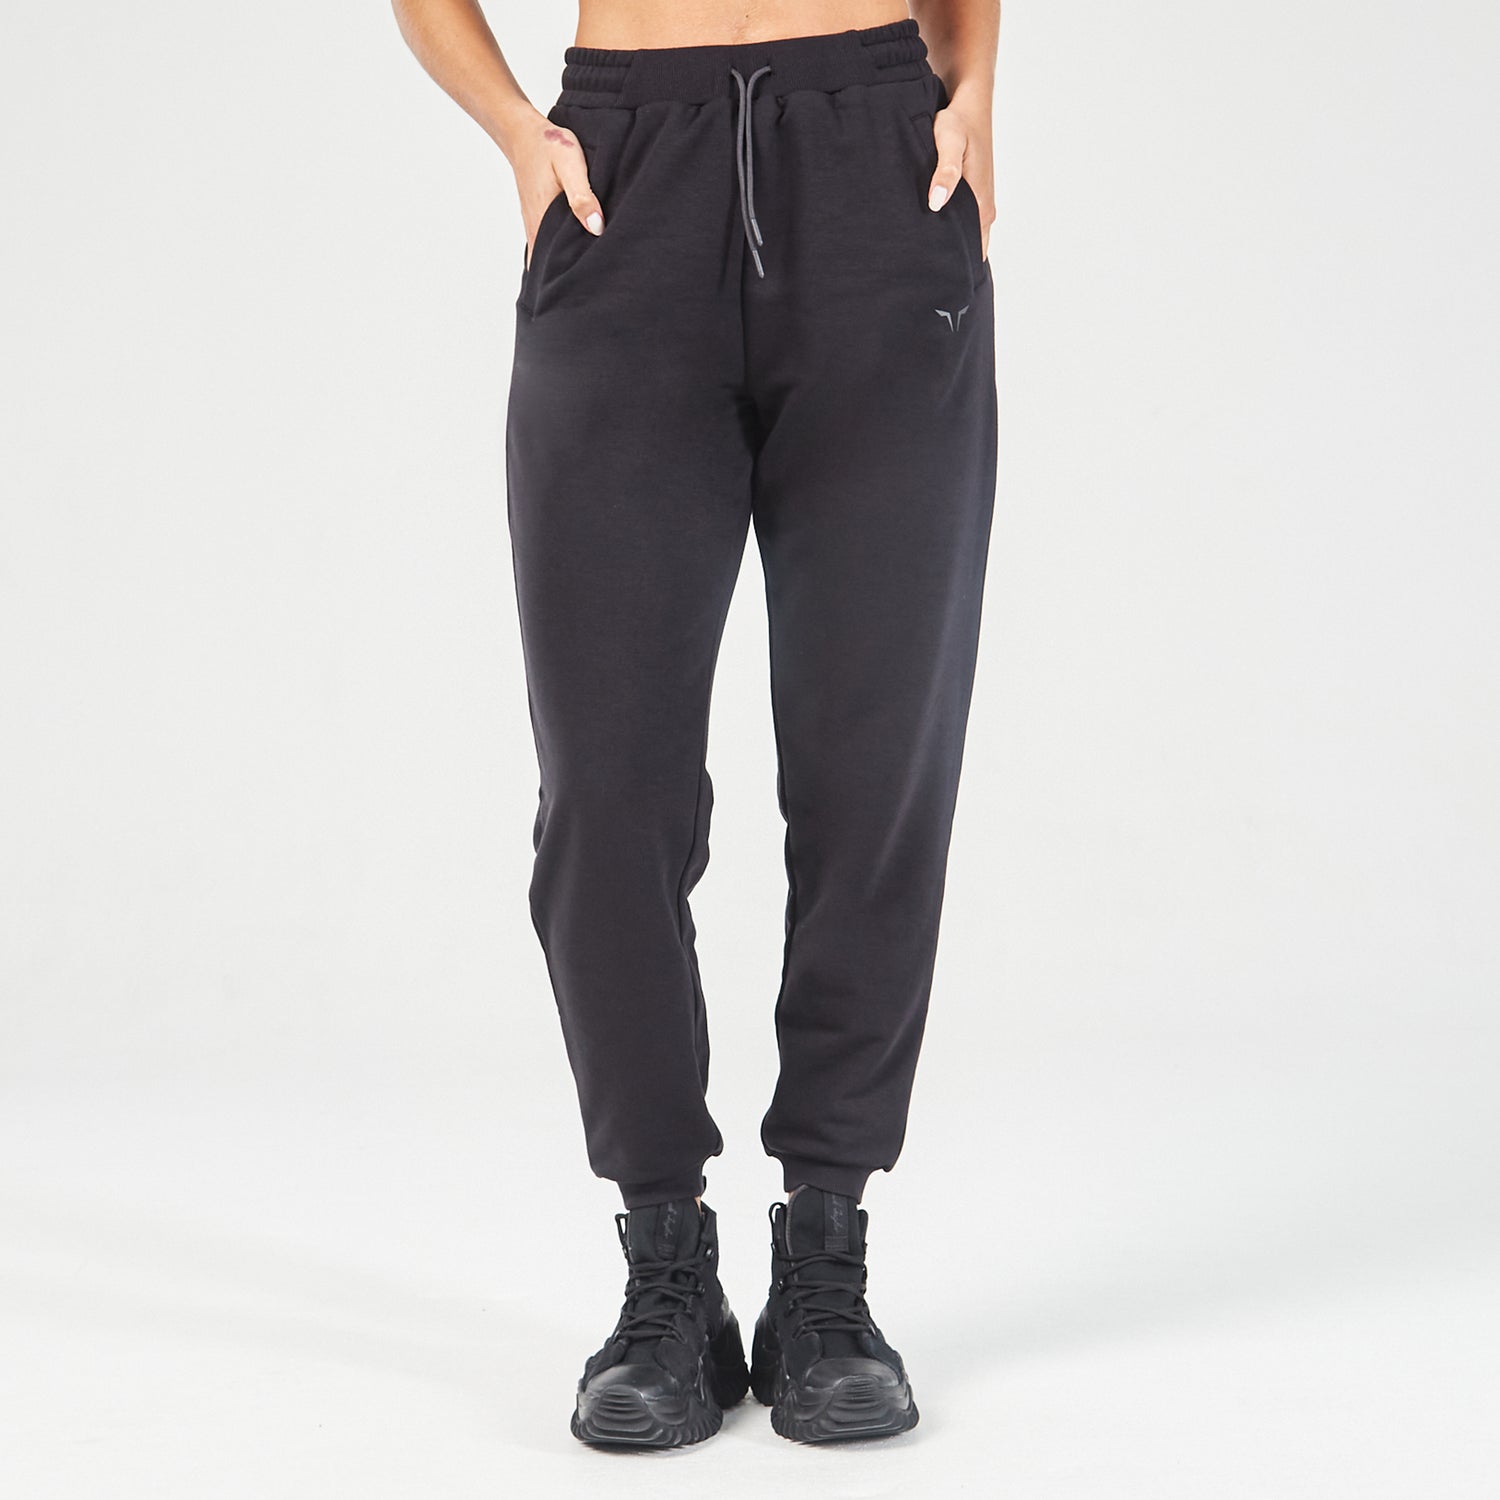 AE, Essential Joggers - Black, Workout Pants Women